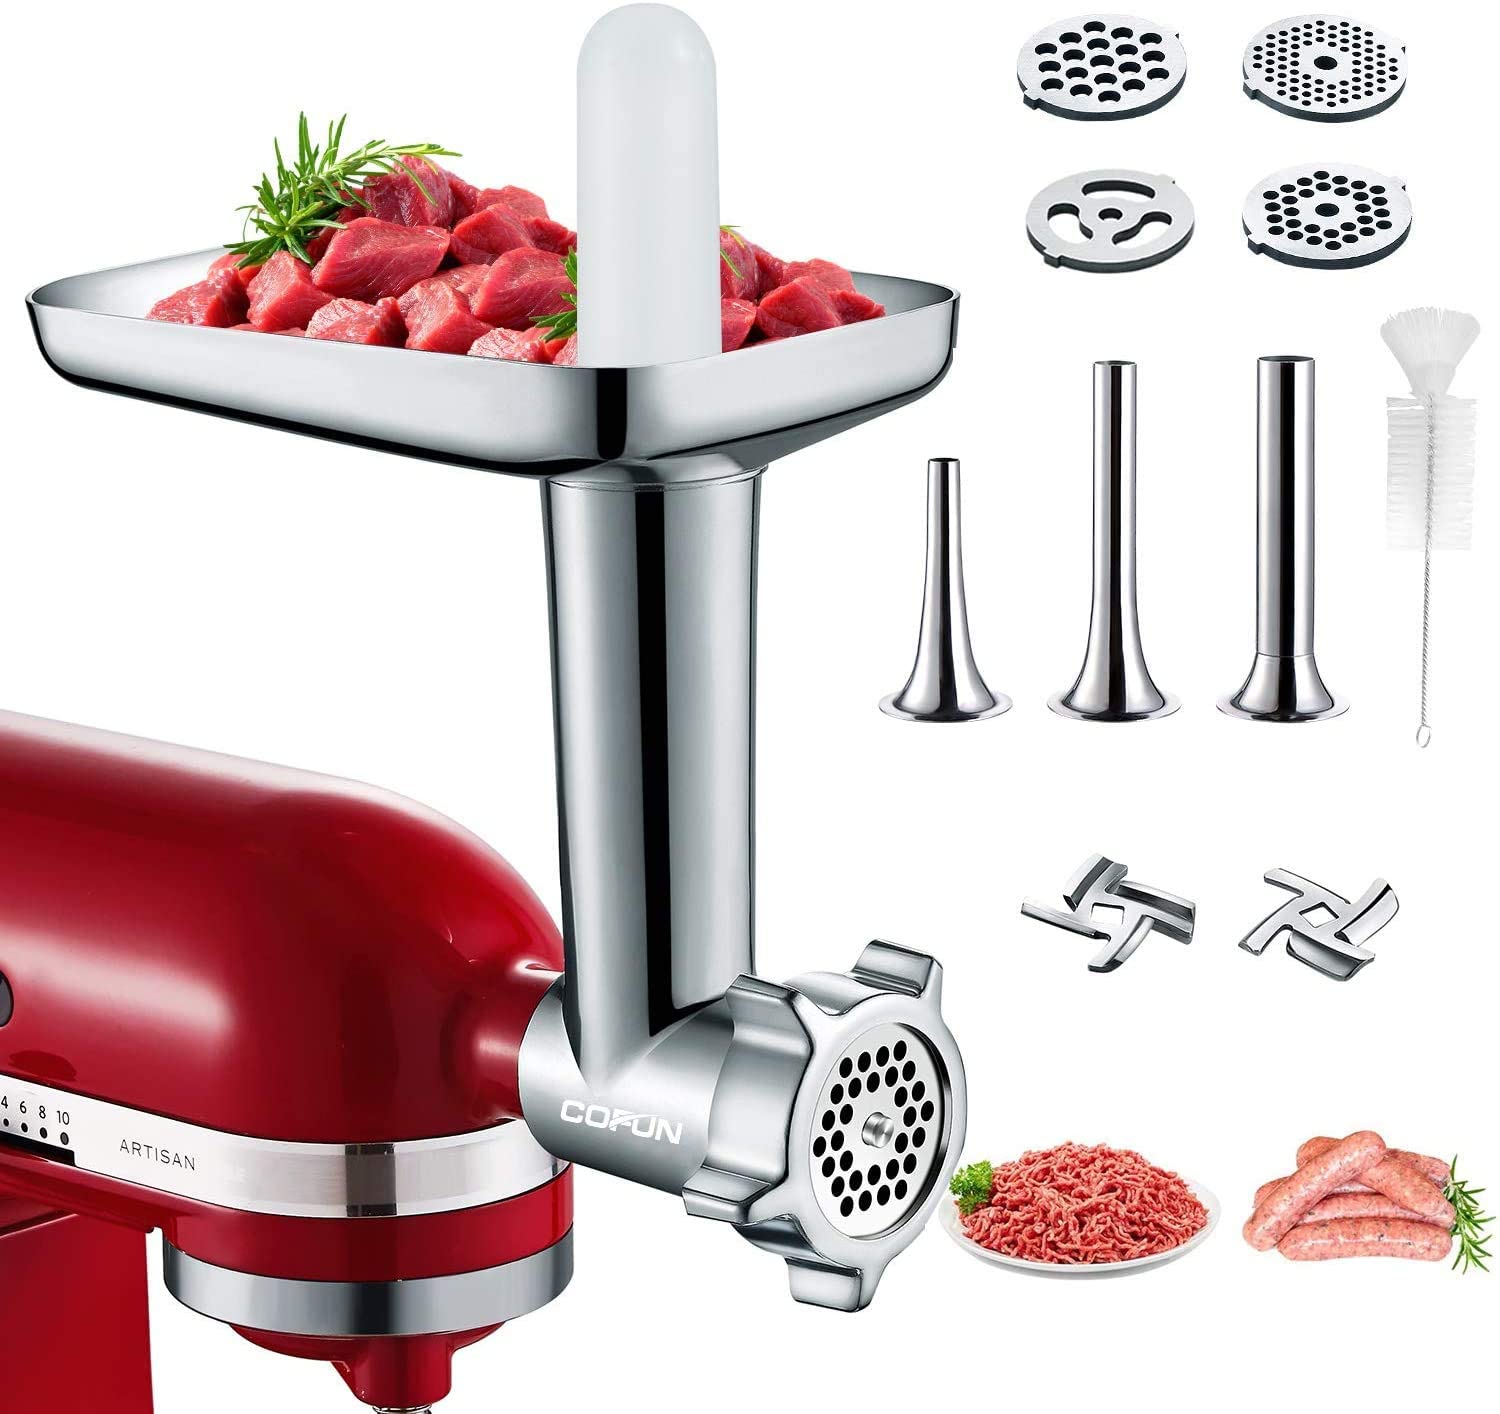 Meat Grinder Attachments for KitchenAid Stand Mixer, Metal Meat Grinder Attachment, Compatible with All KitchenAid Stand Mixers, COFUN Meat Grinder Accessories with 3 Sausage Filling Tubes